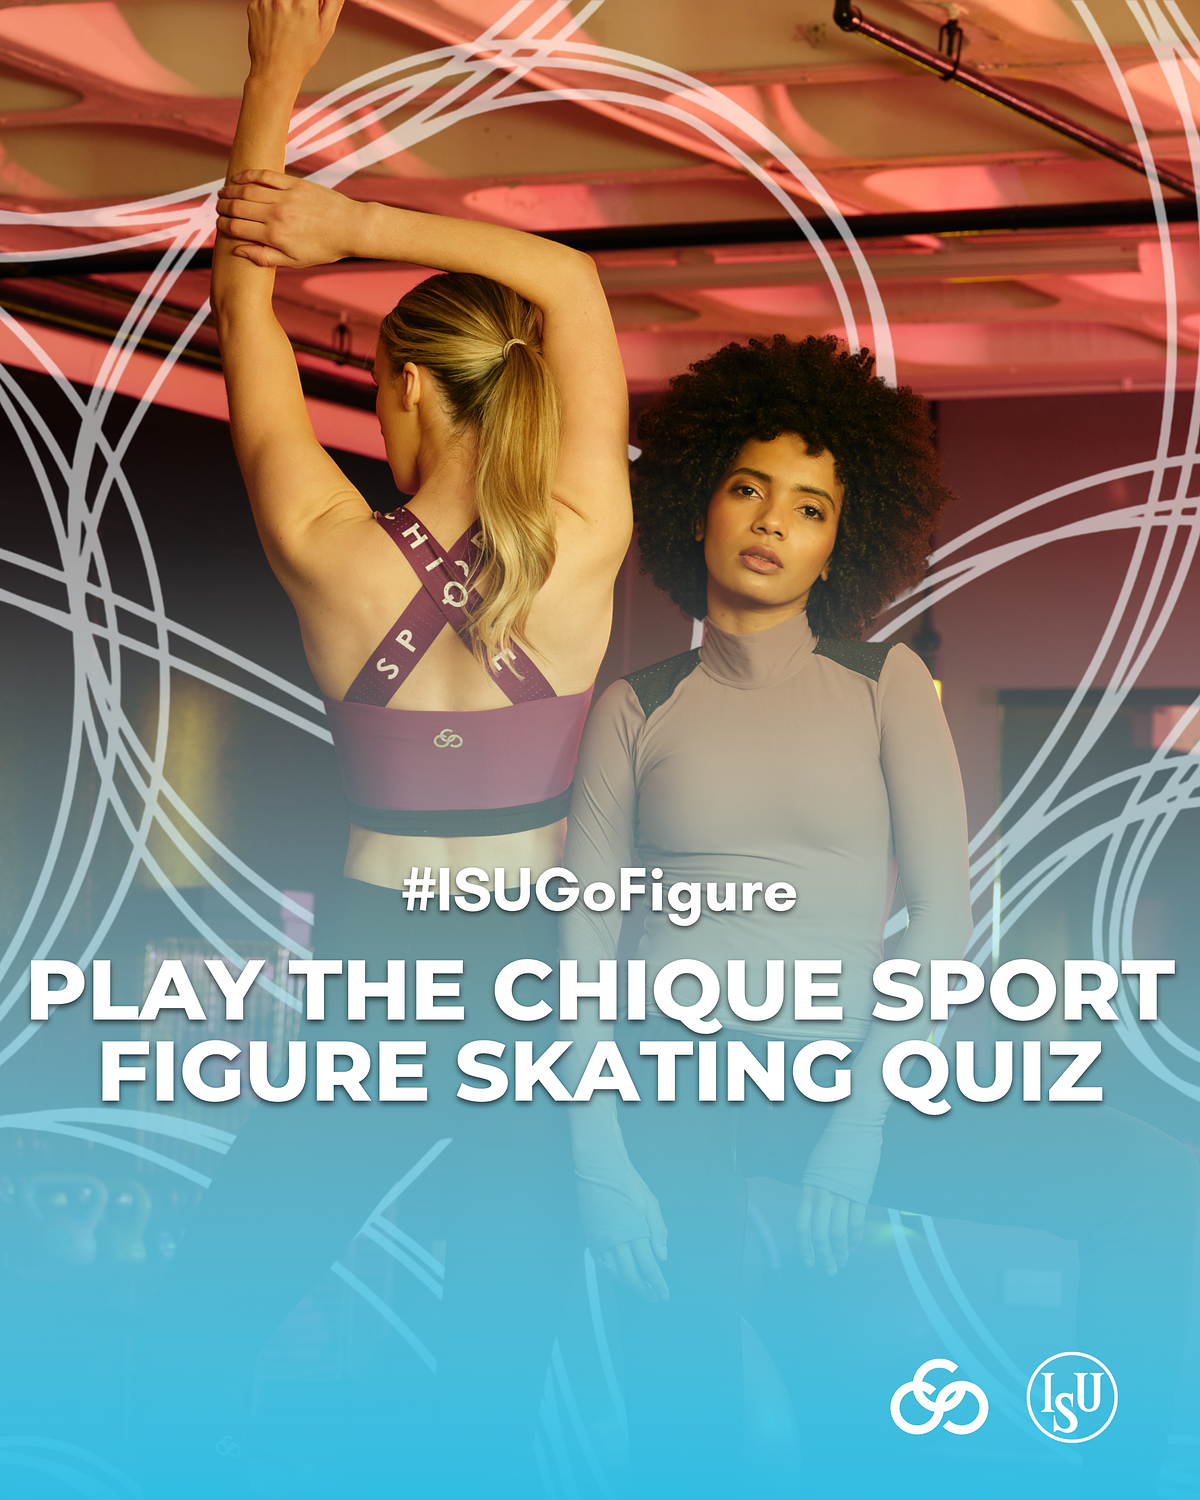 WEEK 2: The Chique Sport Figure Skating Quiz - in collaboration